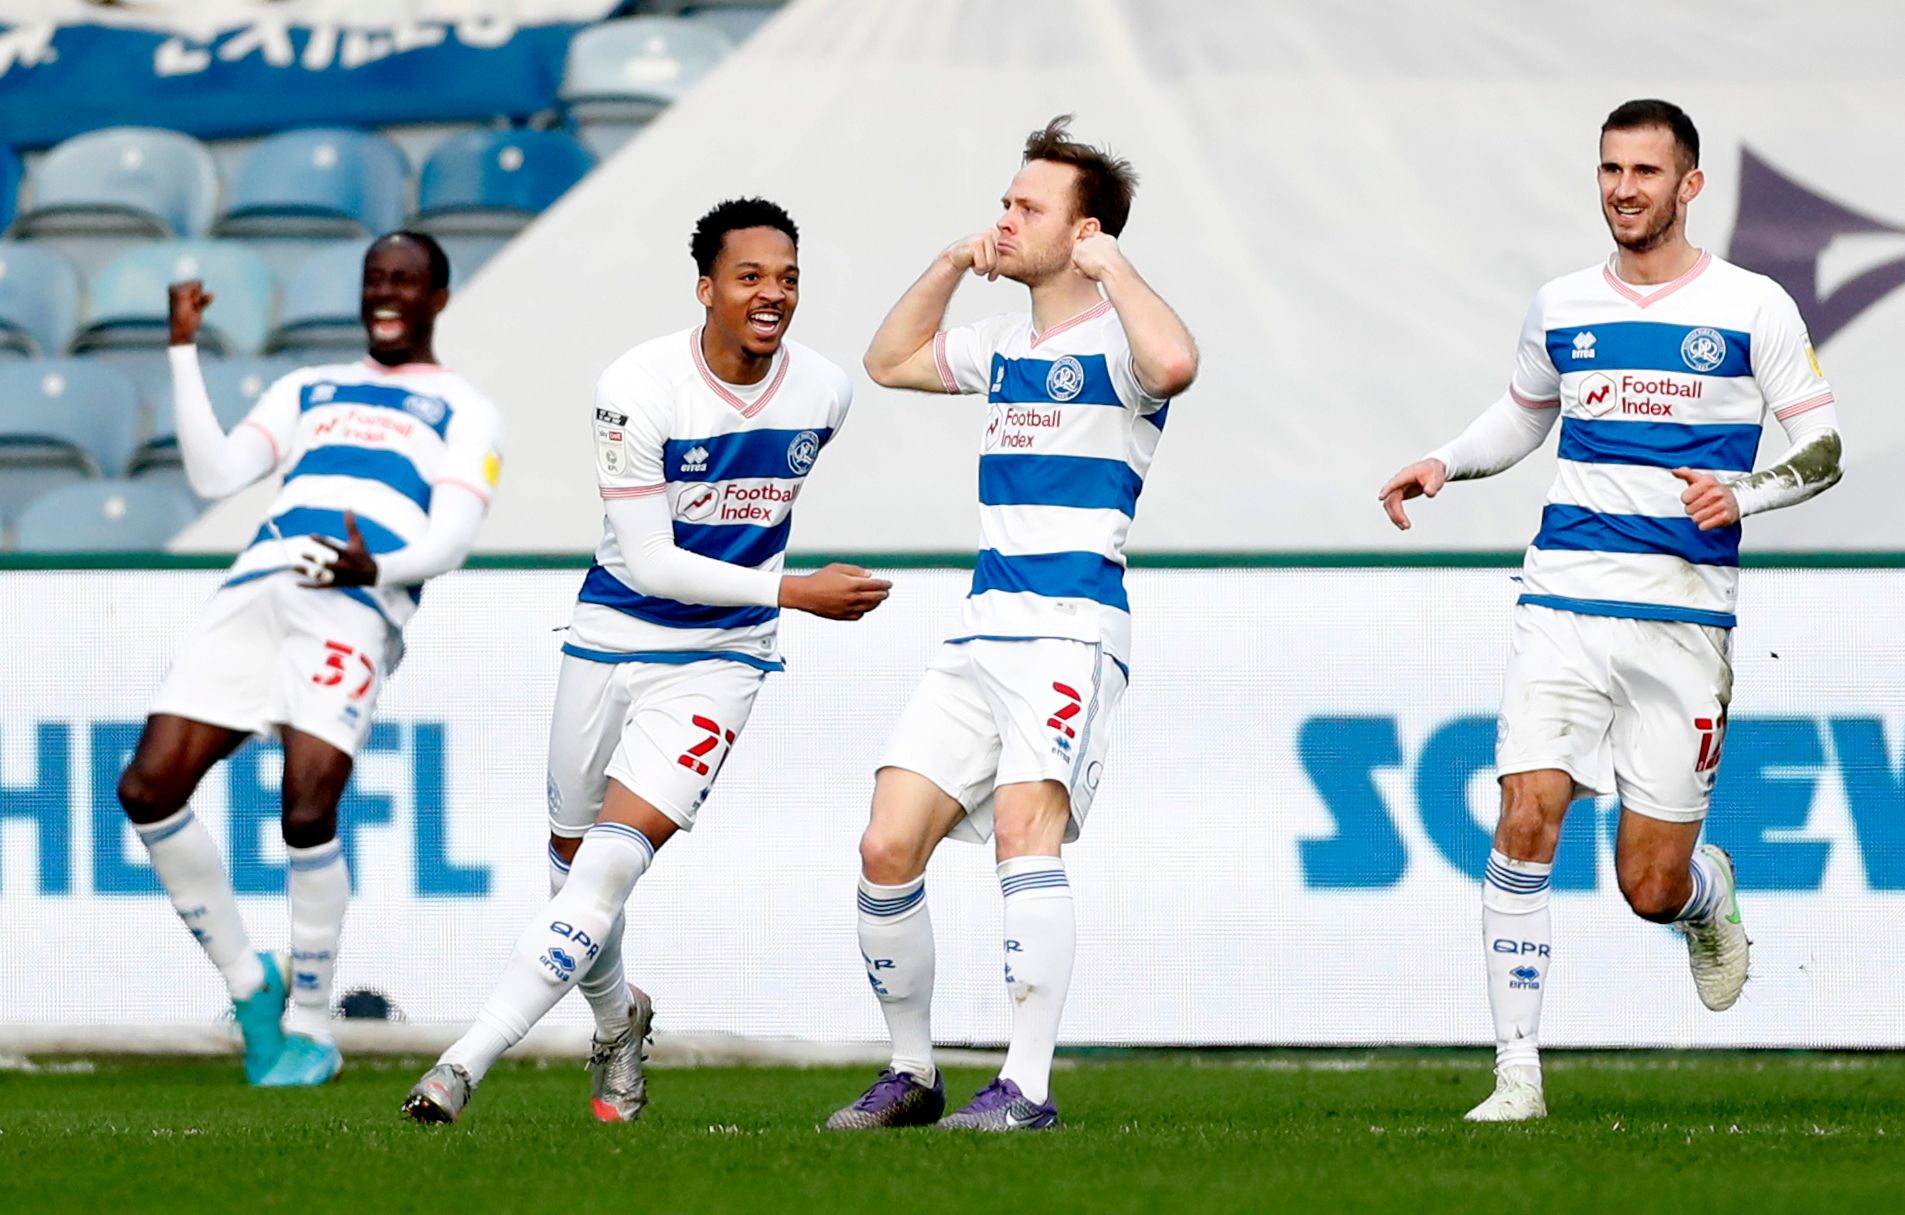 Soccer Football - Championship - Queens Park Rangers v AFC Bournemouth - Loftus Road, London, Britain - February 20, 2021 Queens Park Rangers' Todd Kane celebrates scoring their second goal with teammates Action Images/Matthew Childs EDITORIAL USE ONLY. No use with unauthorized audio, video, data, fixture lists, club/league logos or 'live' services. Online in-match use limited to 75 images, no video emulation. No use in betting, games or single club /league/player publications.  Please contact y